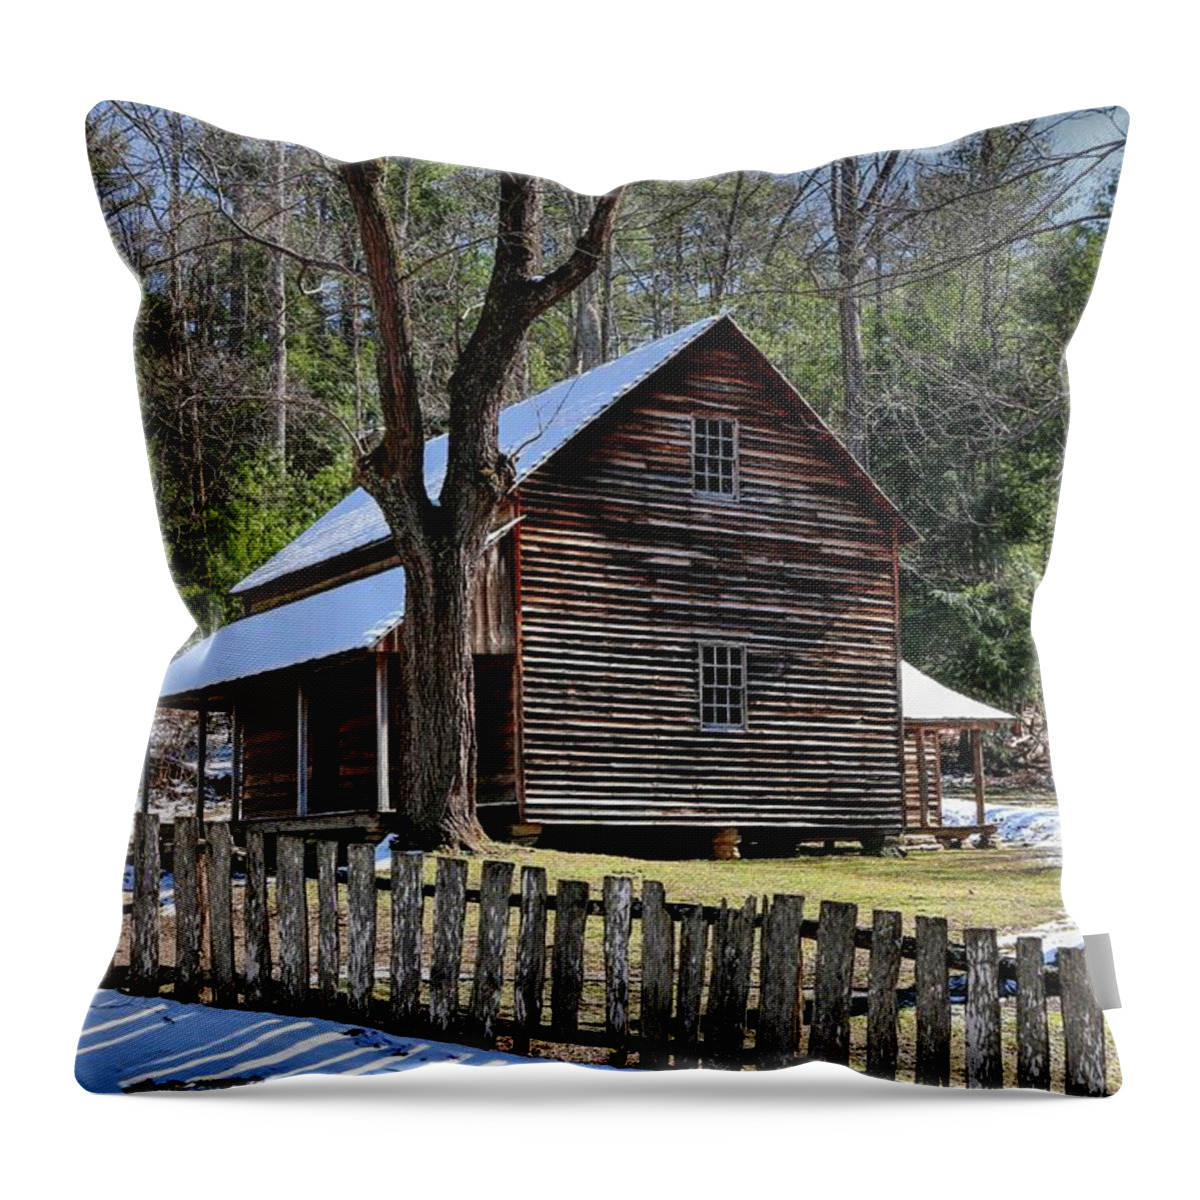 Great Smoky Mountains Throw Pillow featuring the photograph Tipton Cabin Cades Cove In The Great Smoky Mountains National Park by Carol Montoya